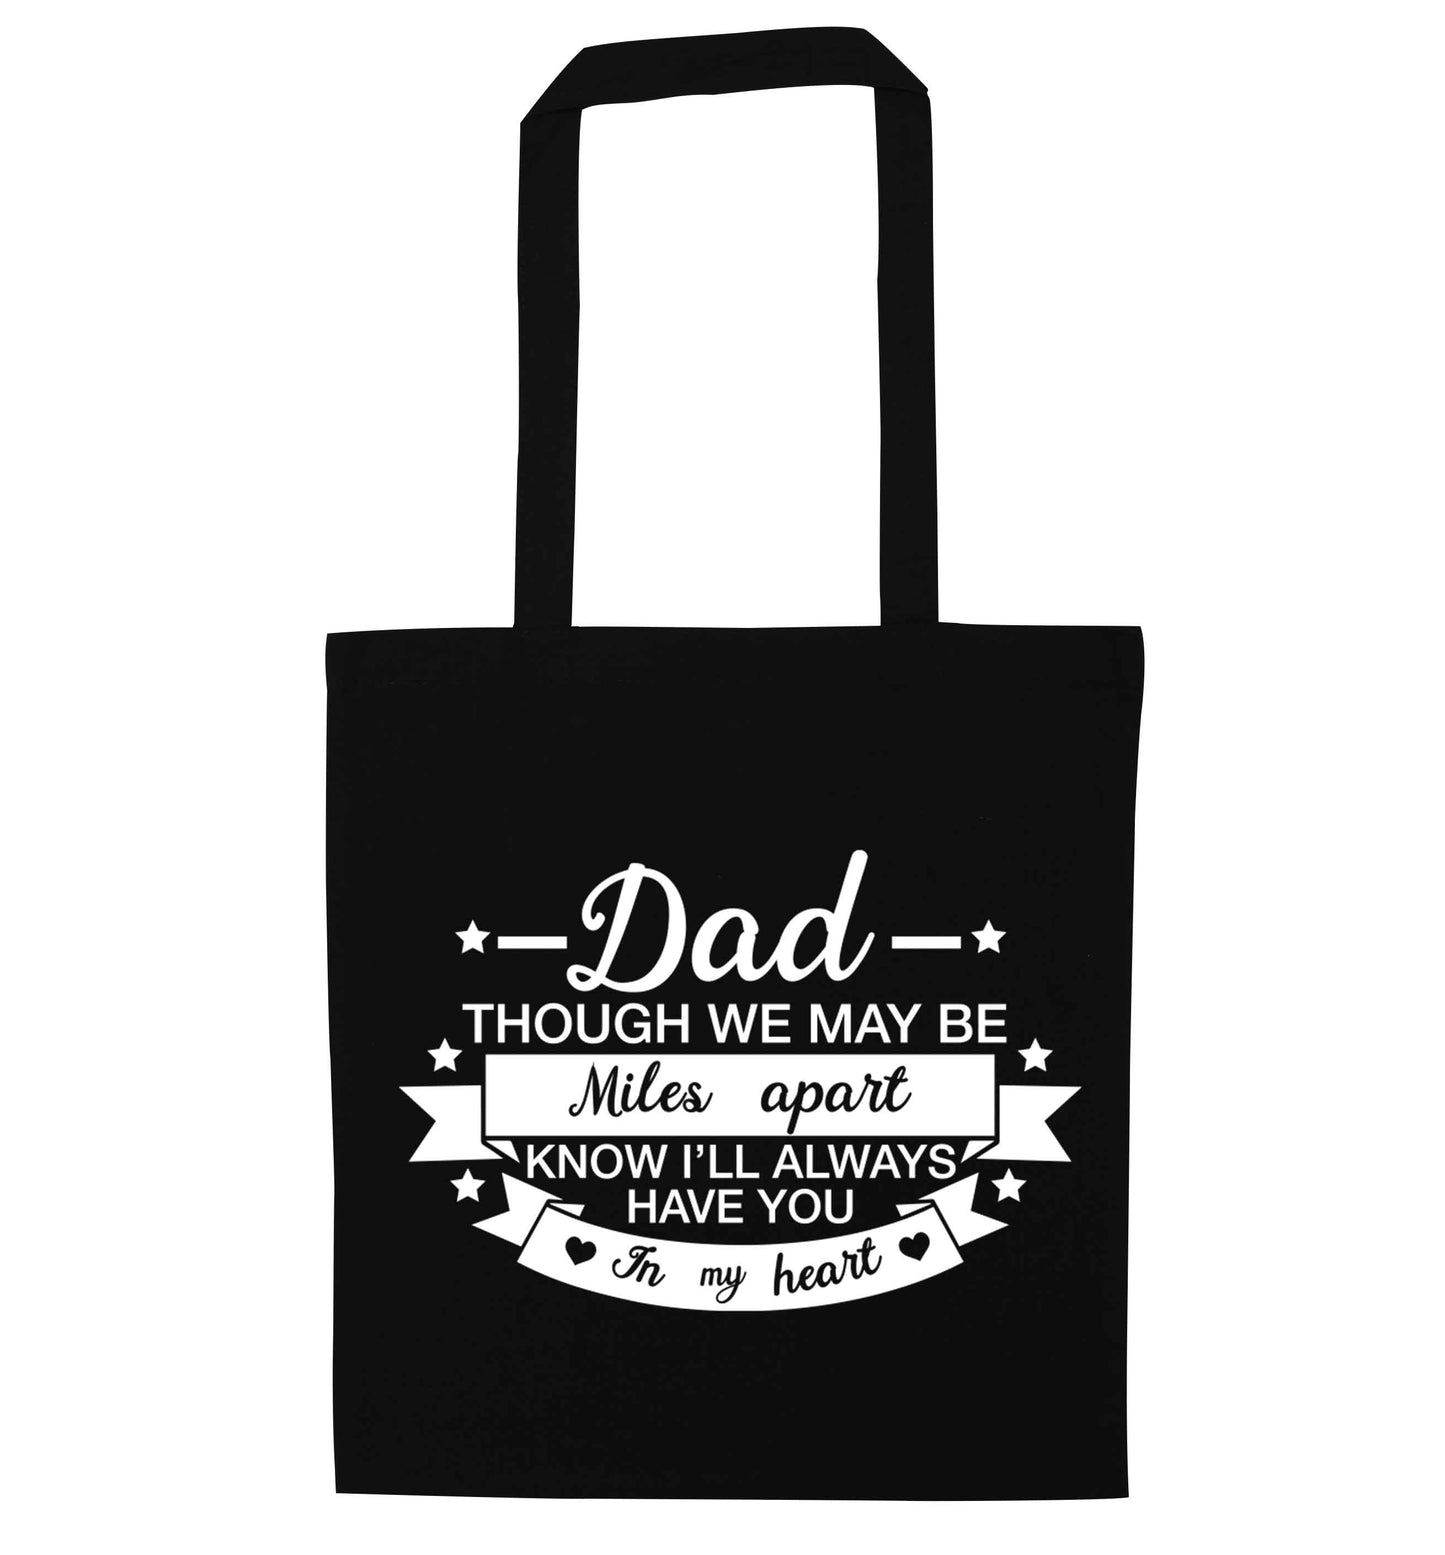 Dad though we are miles apart know I'll always have you in my heart black tote bag